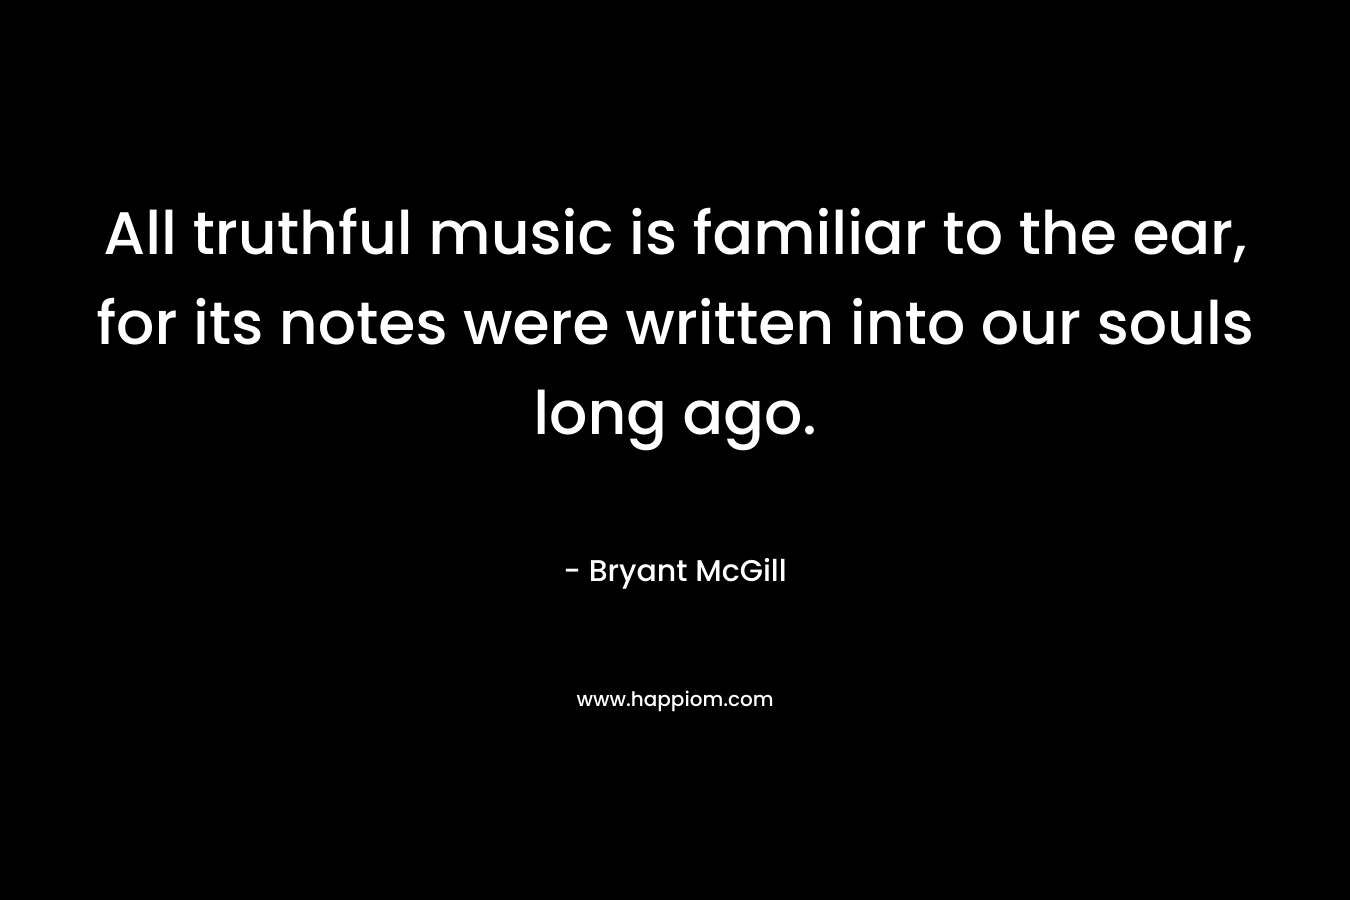 All truthful music is familiar to the ear, for its notes were written into our souls long ago.